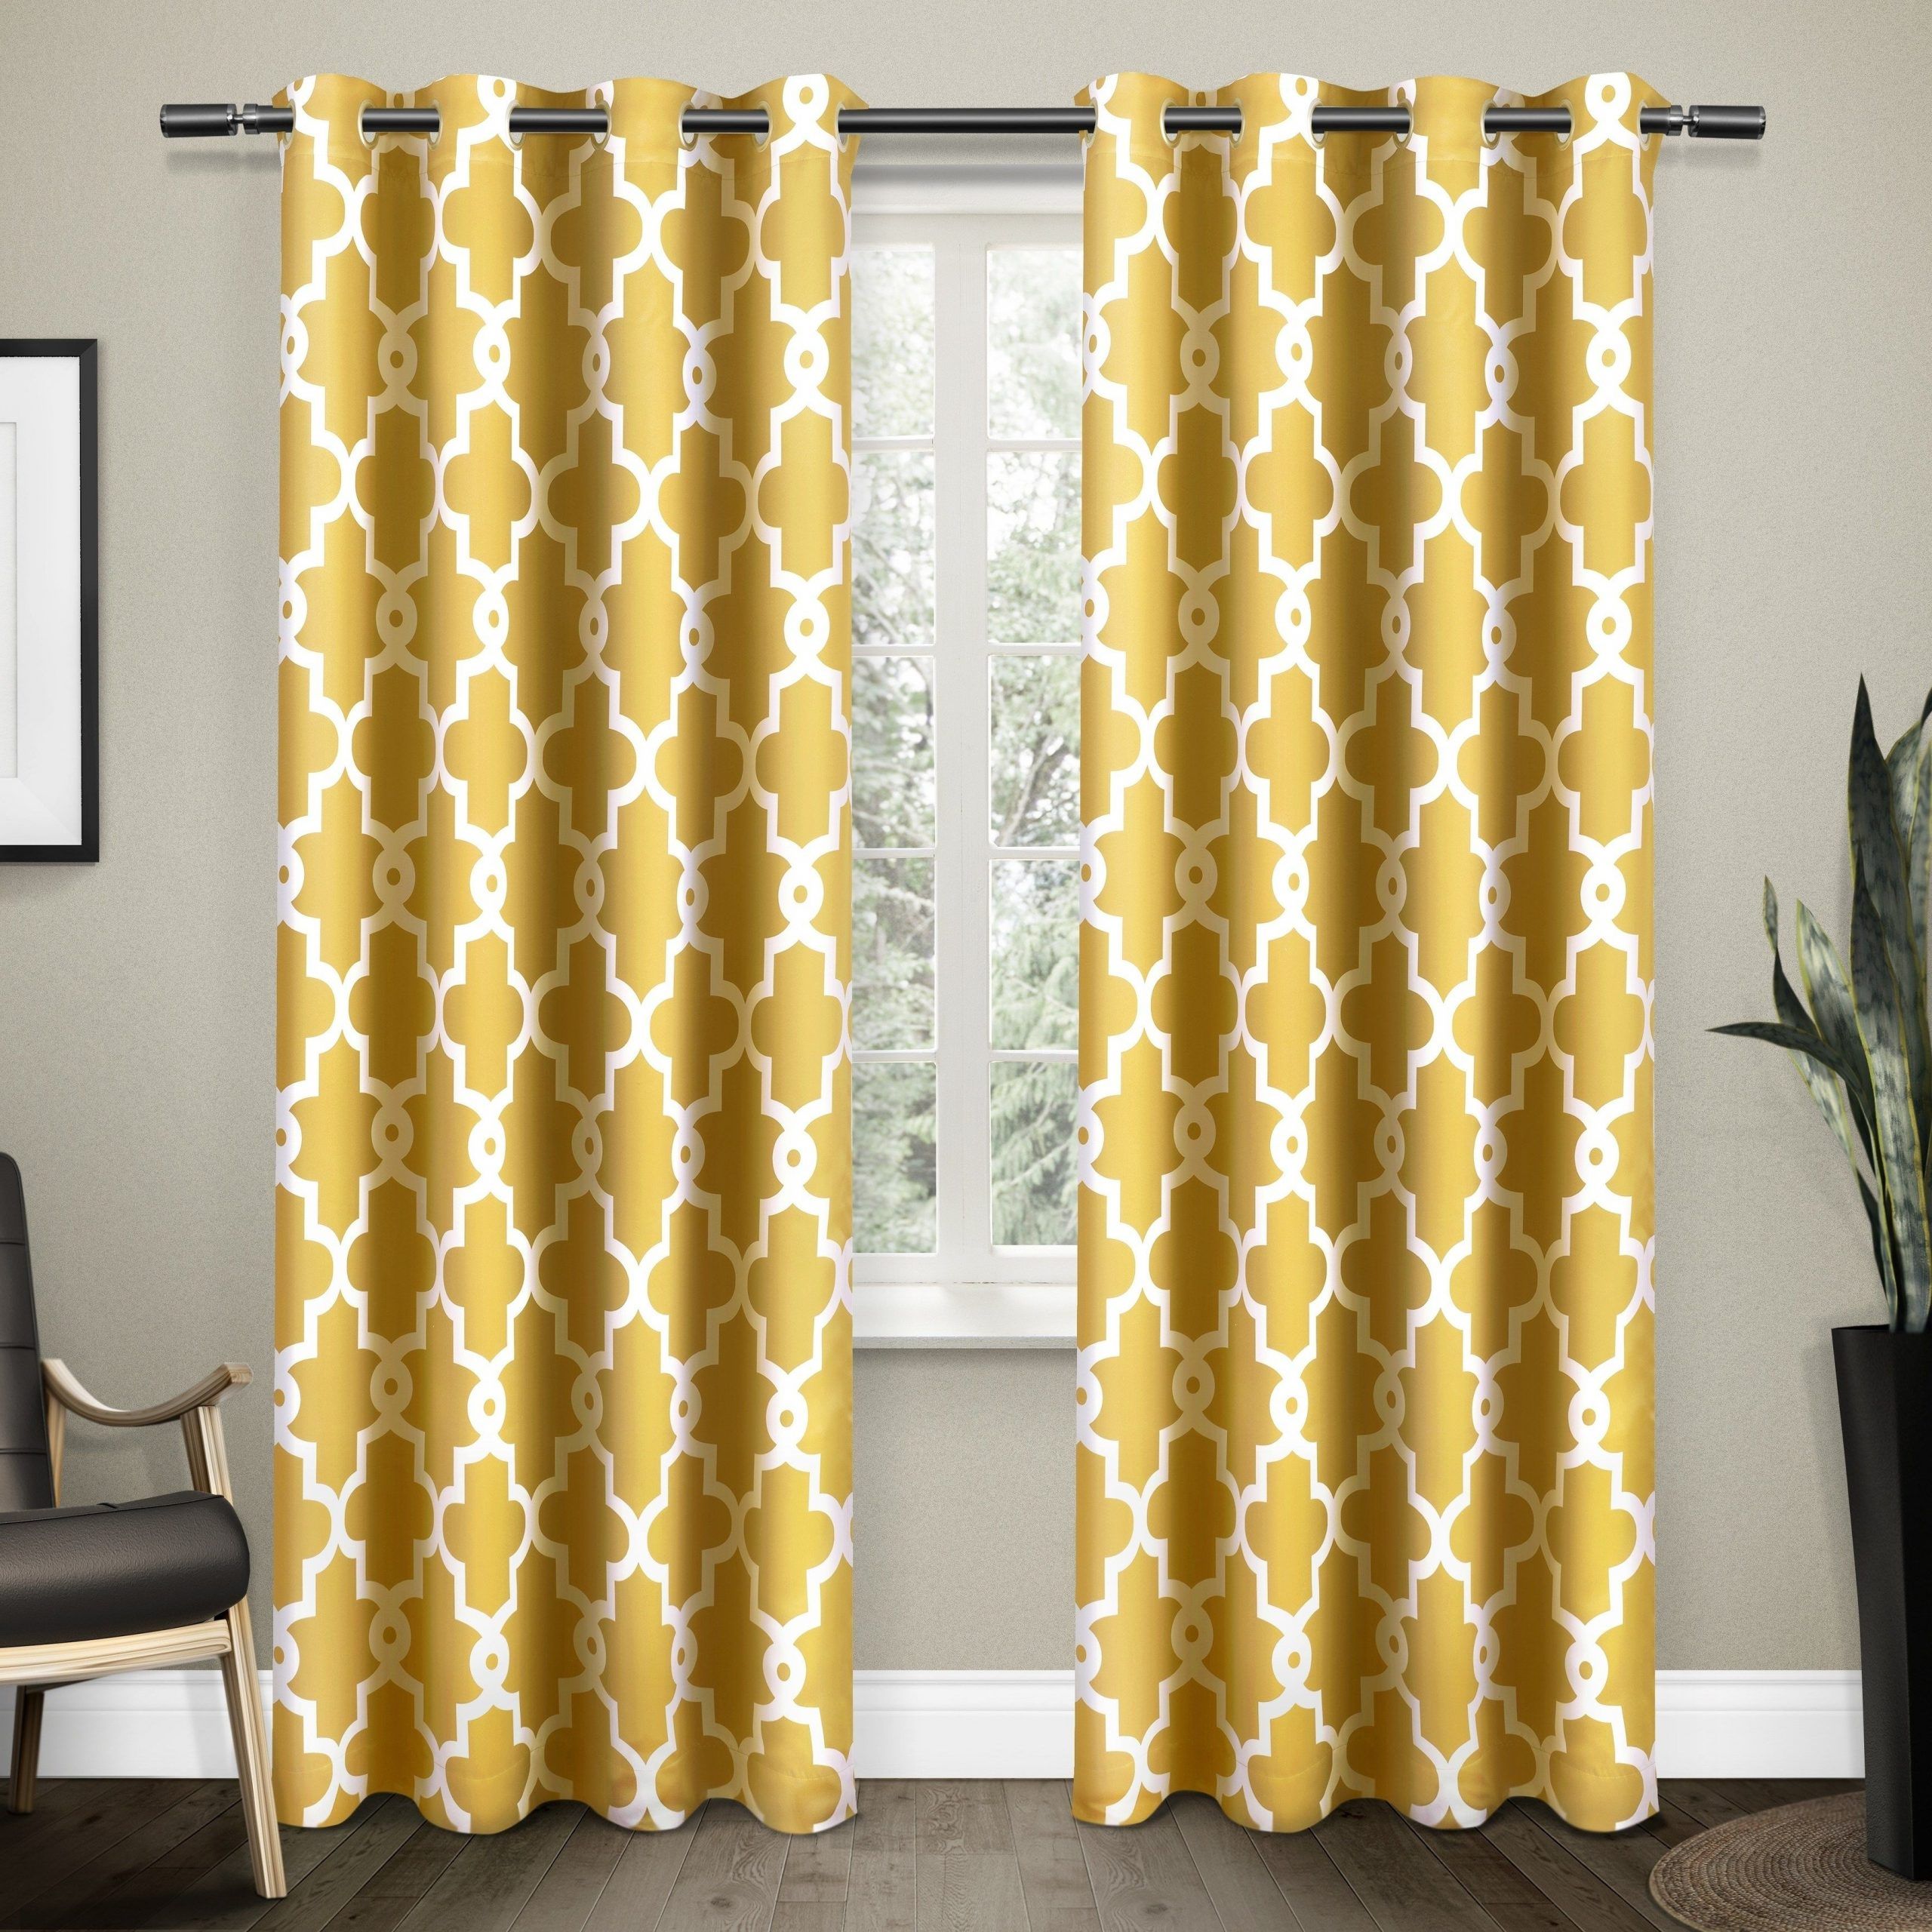 Fashionable The Curated Nomad Duane Blackout Curtain Panel Pairs Pertaining To Oliver & James Ati Home Ironwork Sateen Woven Blackout (View 9 of 20)